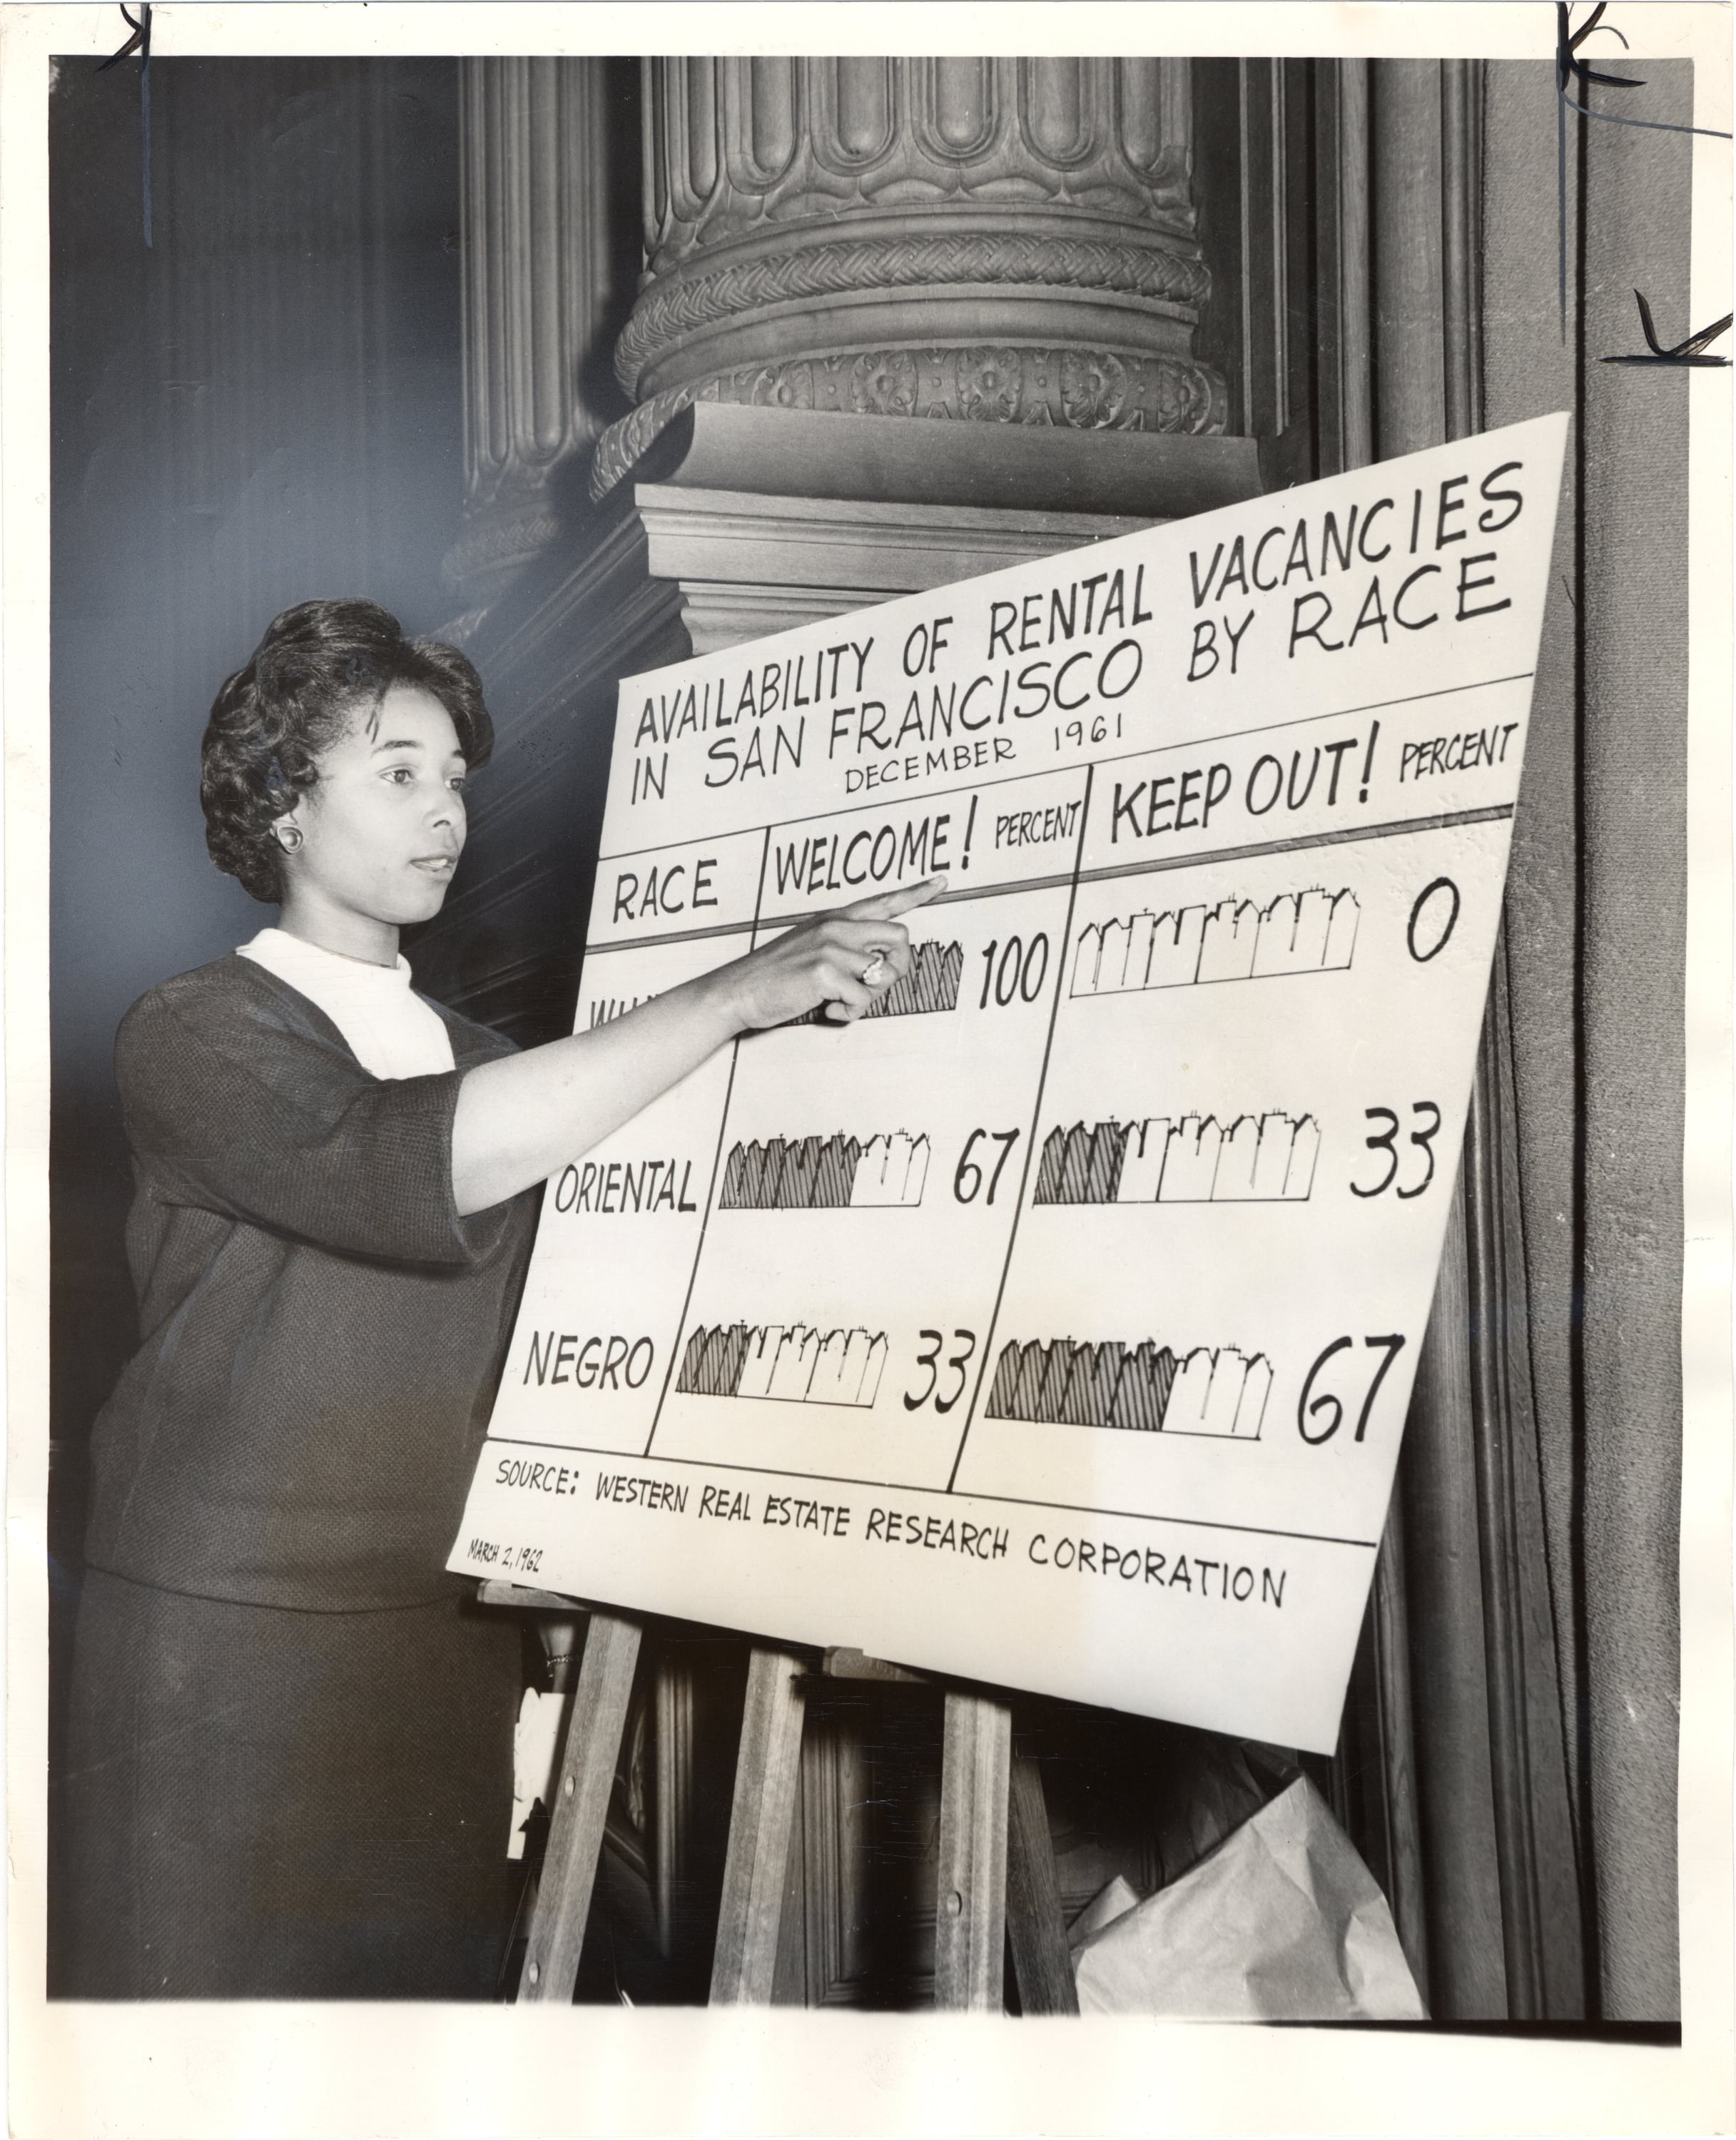 In 1962 a Berkeley teacher, Miss Frances Fletcher, presents statistics gathered by the National Real Estate Research Corporation on racial discrimination in San Francisco's rental housing market, which show that two-thirds of landlords refused to rent to African American tenants. Courtesy of San Francisco History Center, San F rancisco Public Library